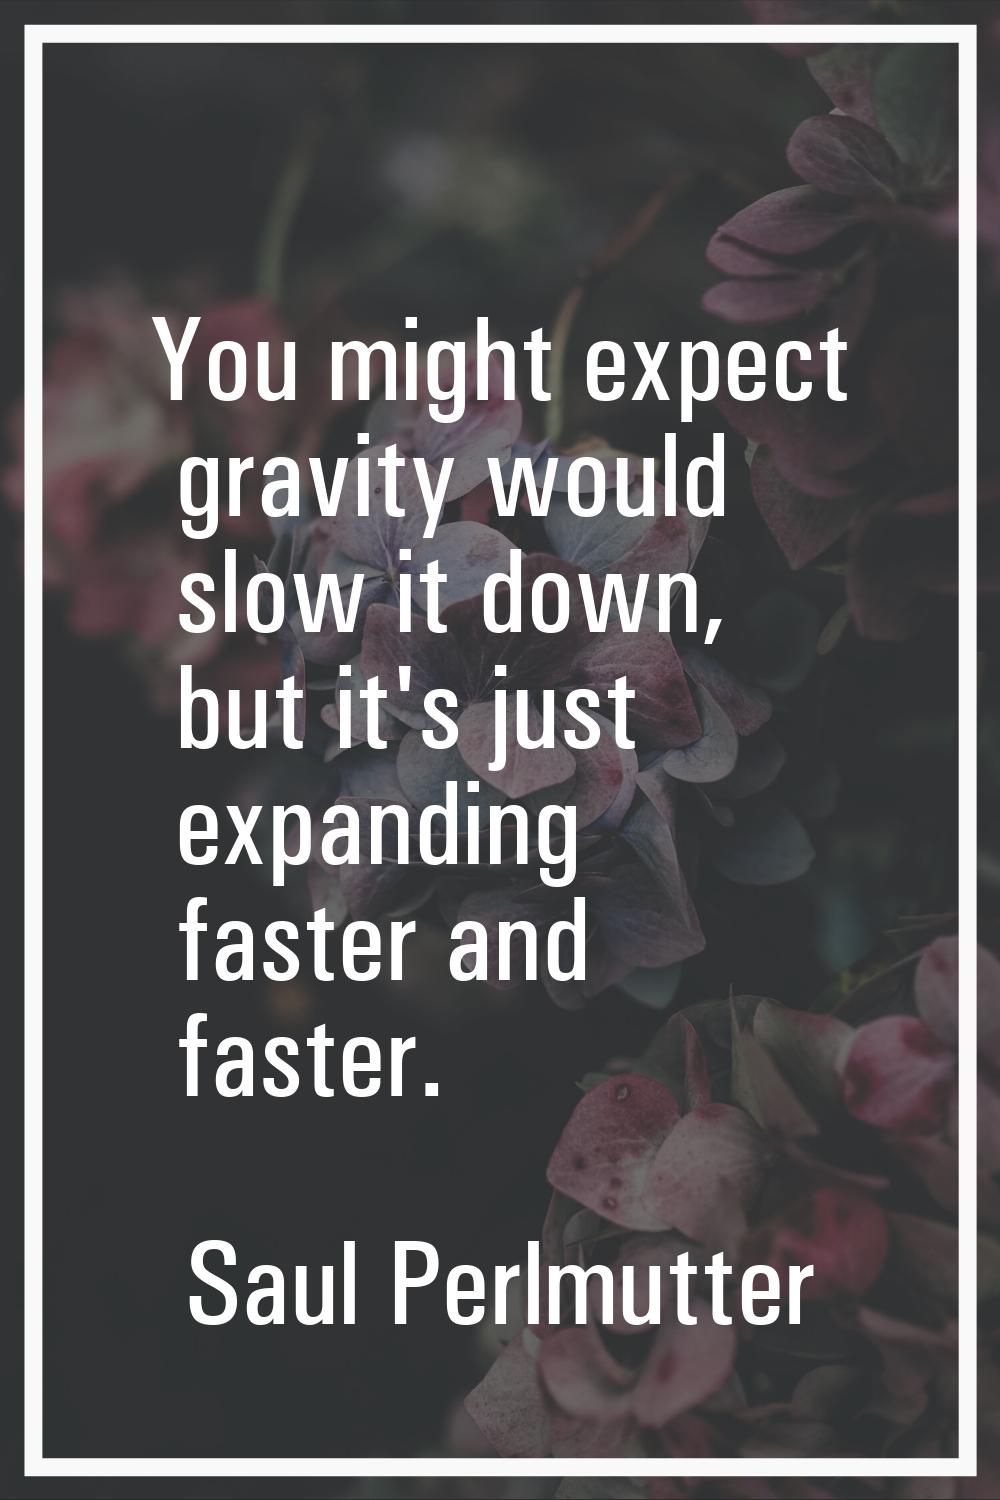 You might expect gravity would slow it down, but it's just expanding faster and faster.